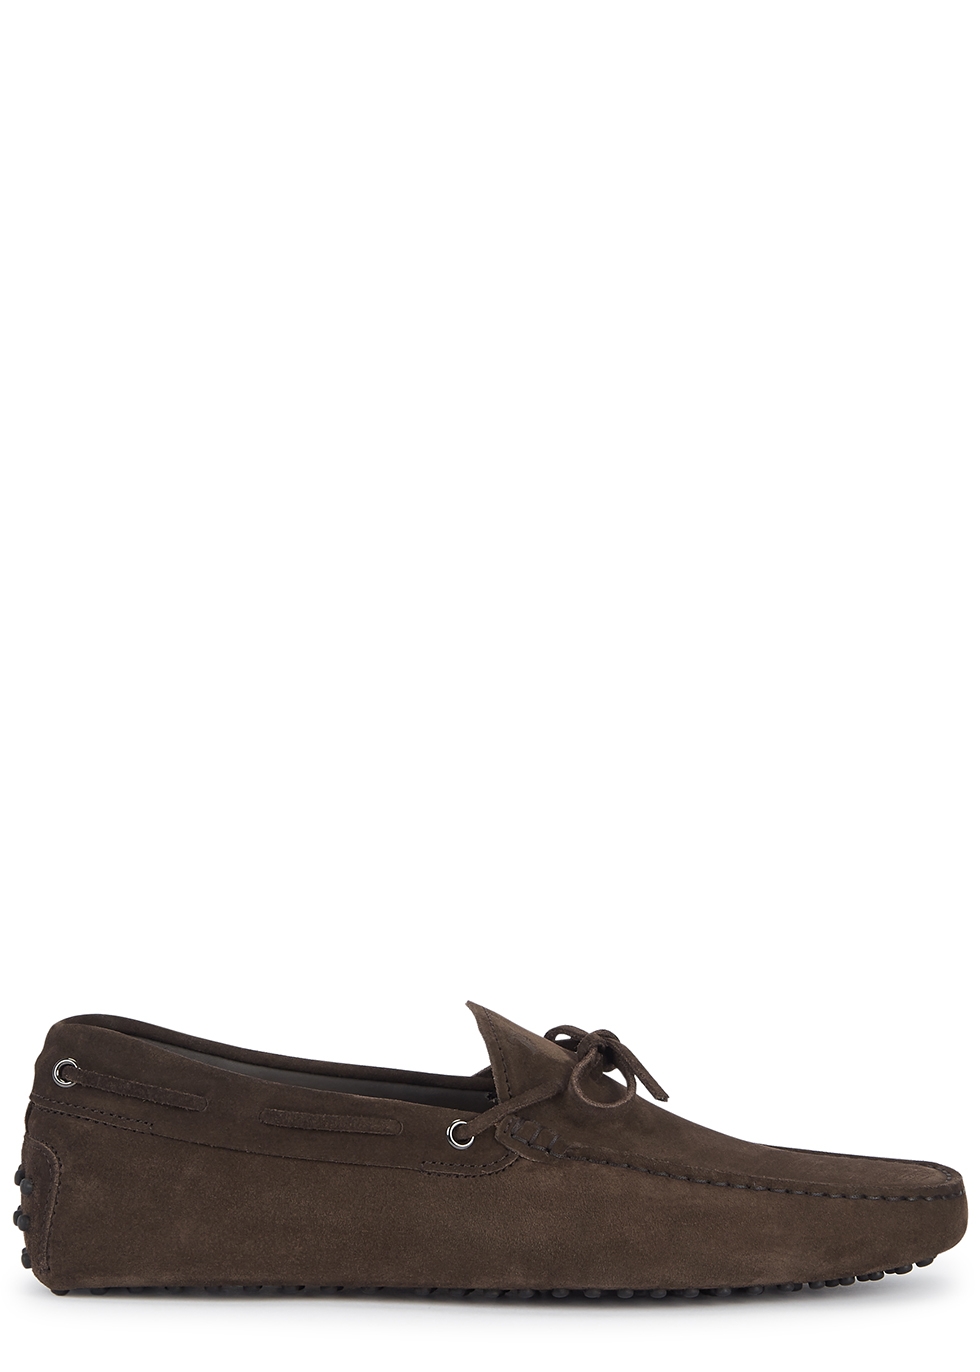 tods gommino suede